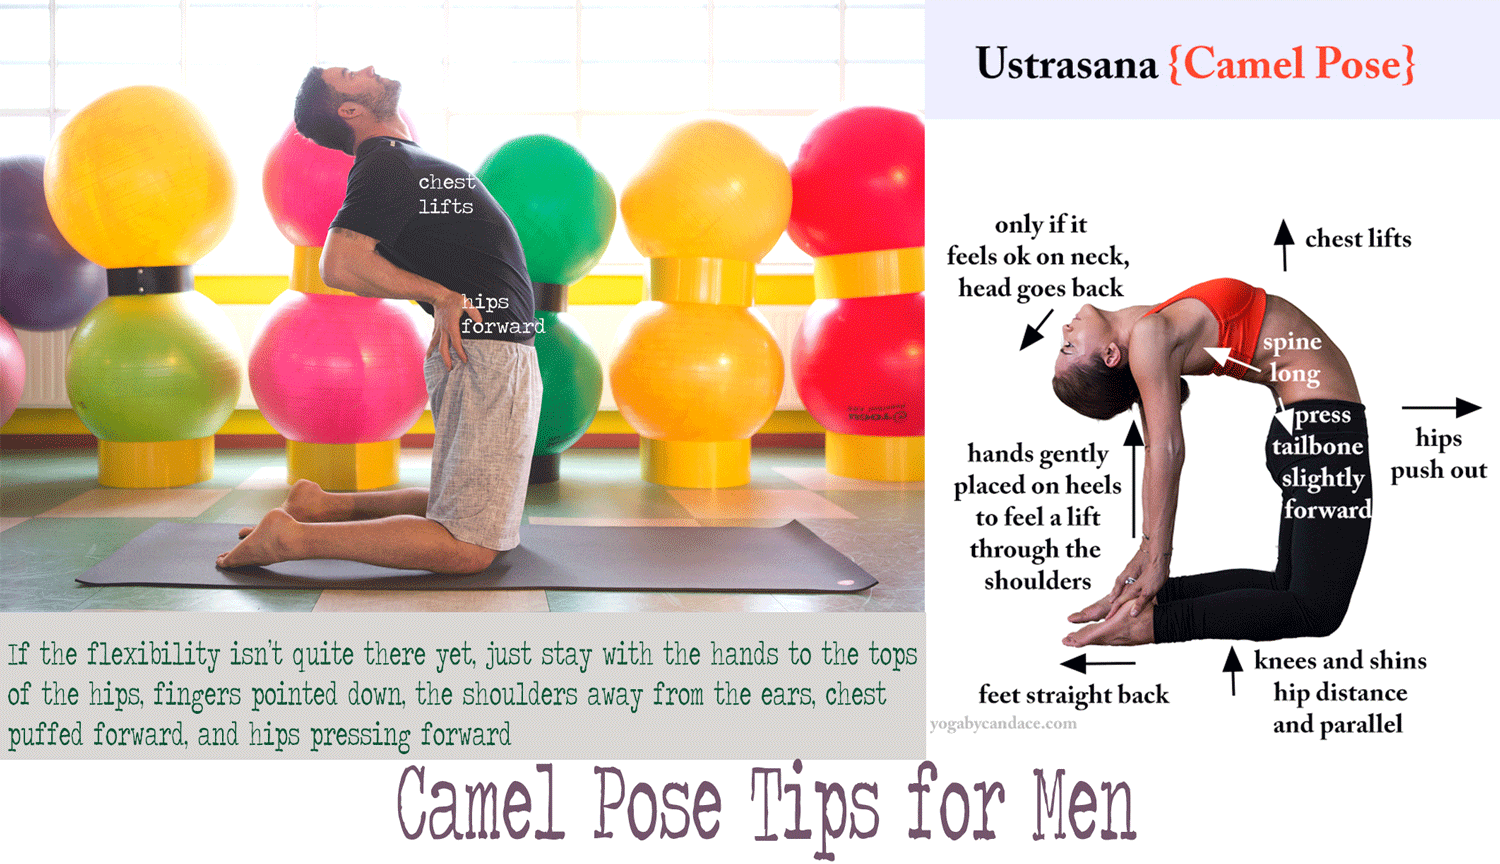 Ustrasana (Camel Pose) : How to Do It, Benefits, Step by Step Instructions  & Precautions